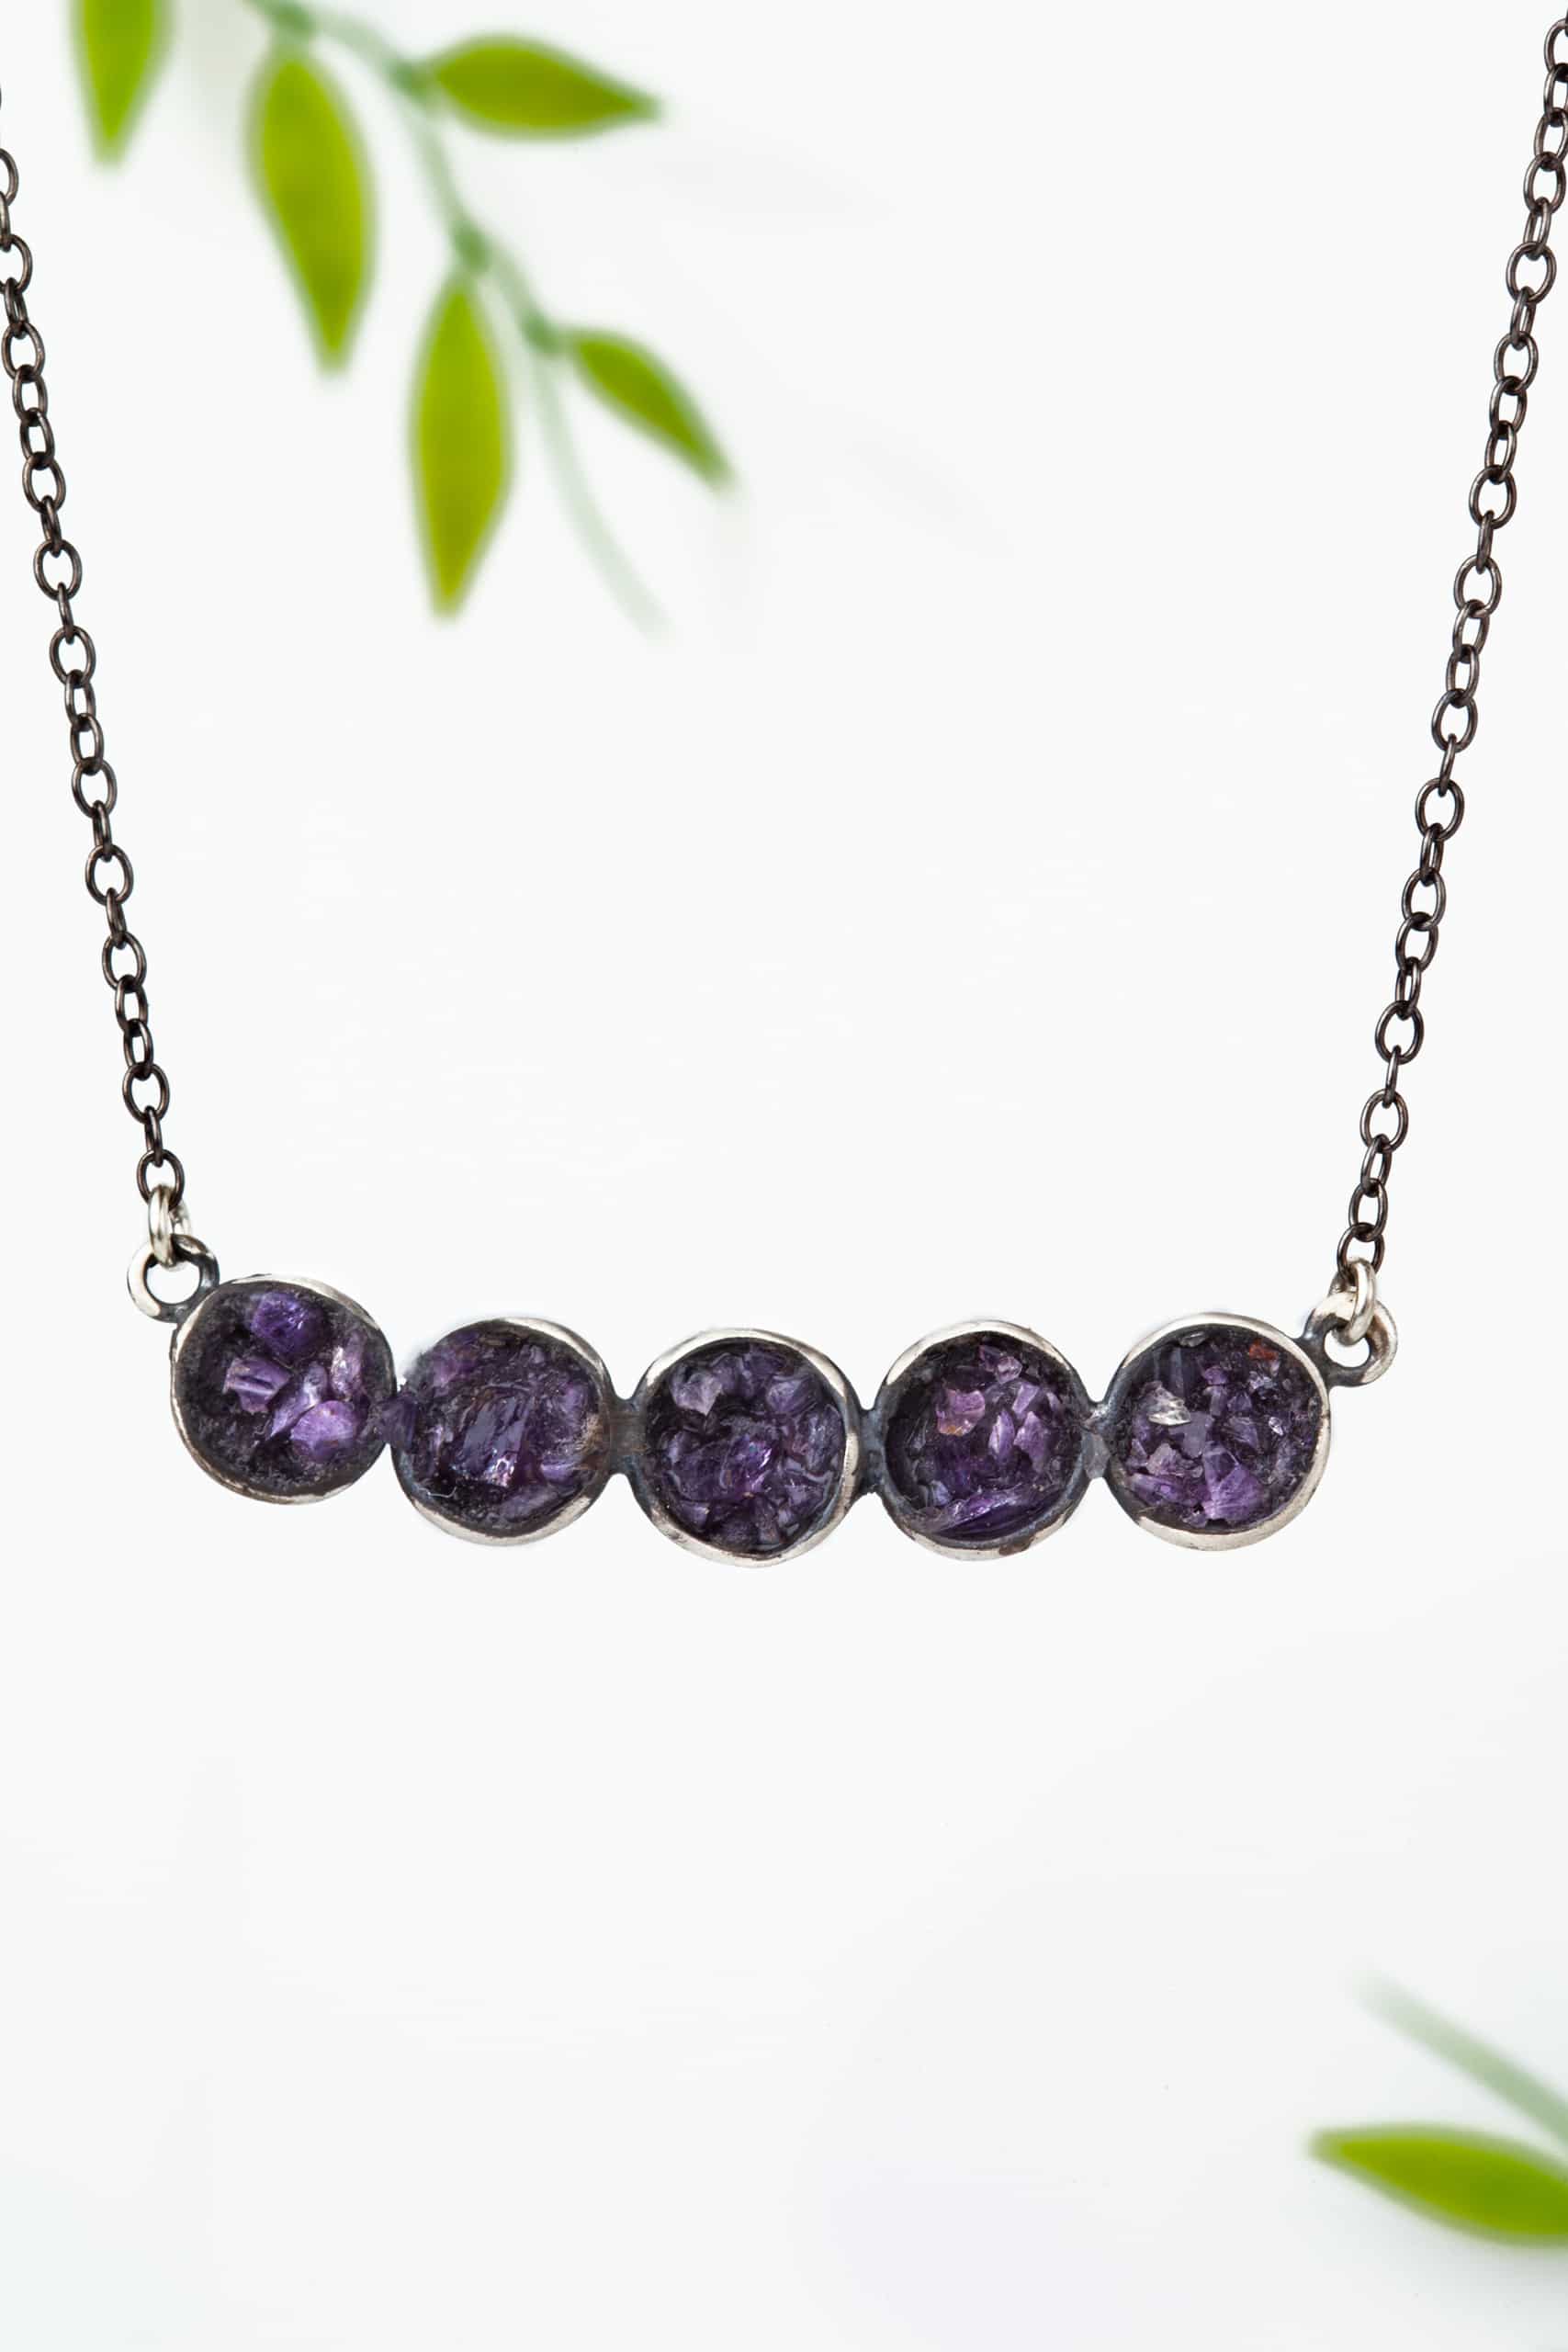 Oxidized silver necklace with amethyst gallery 1